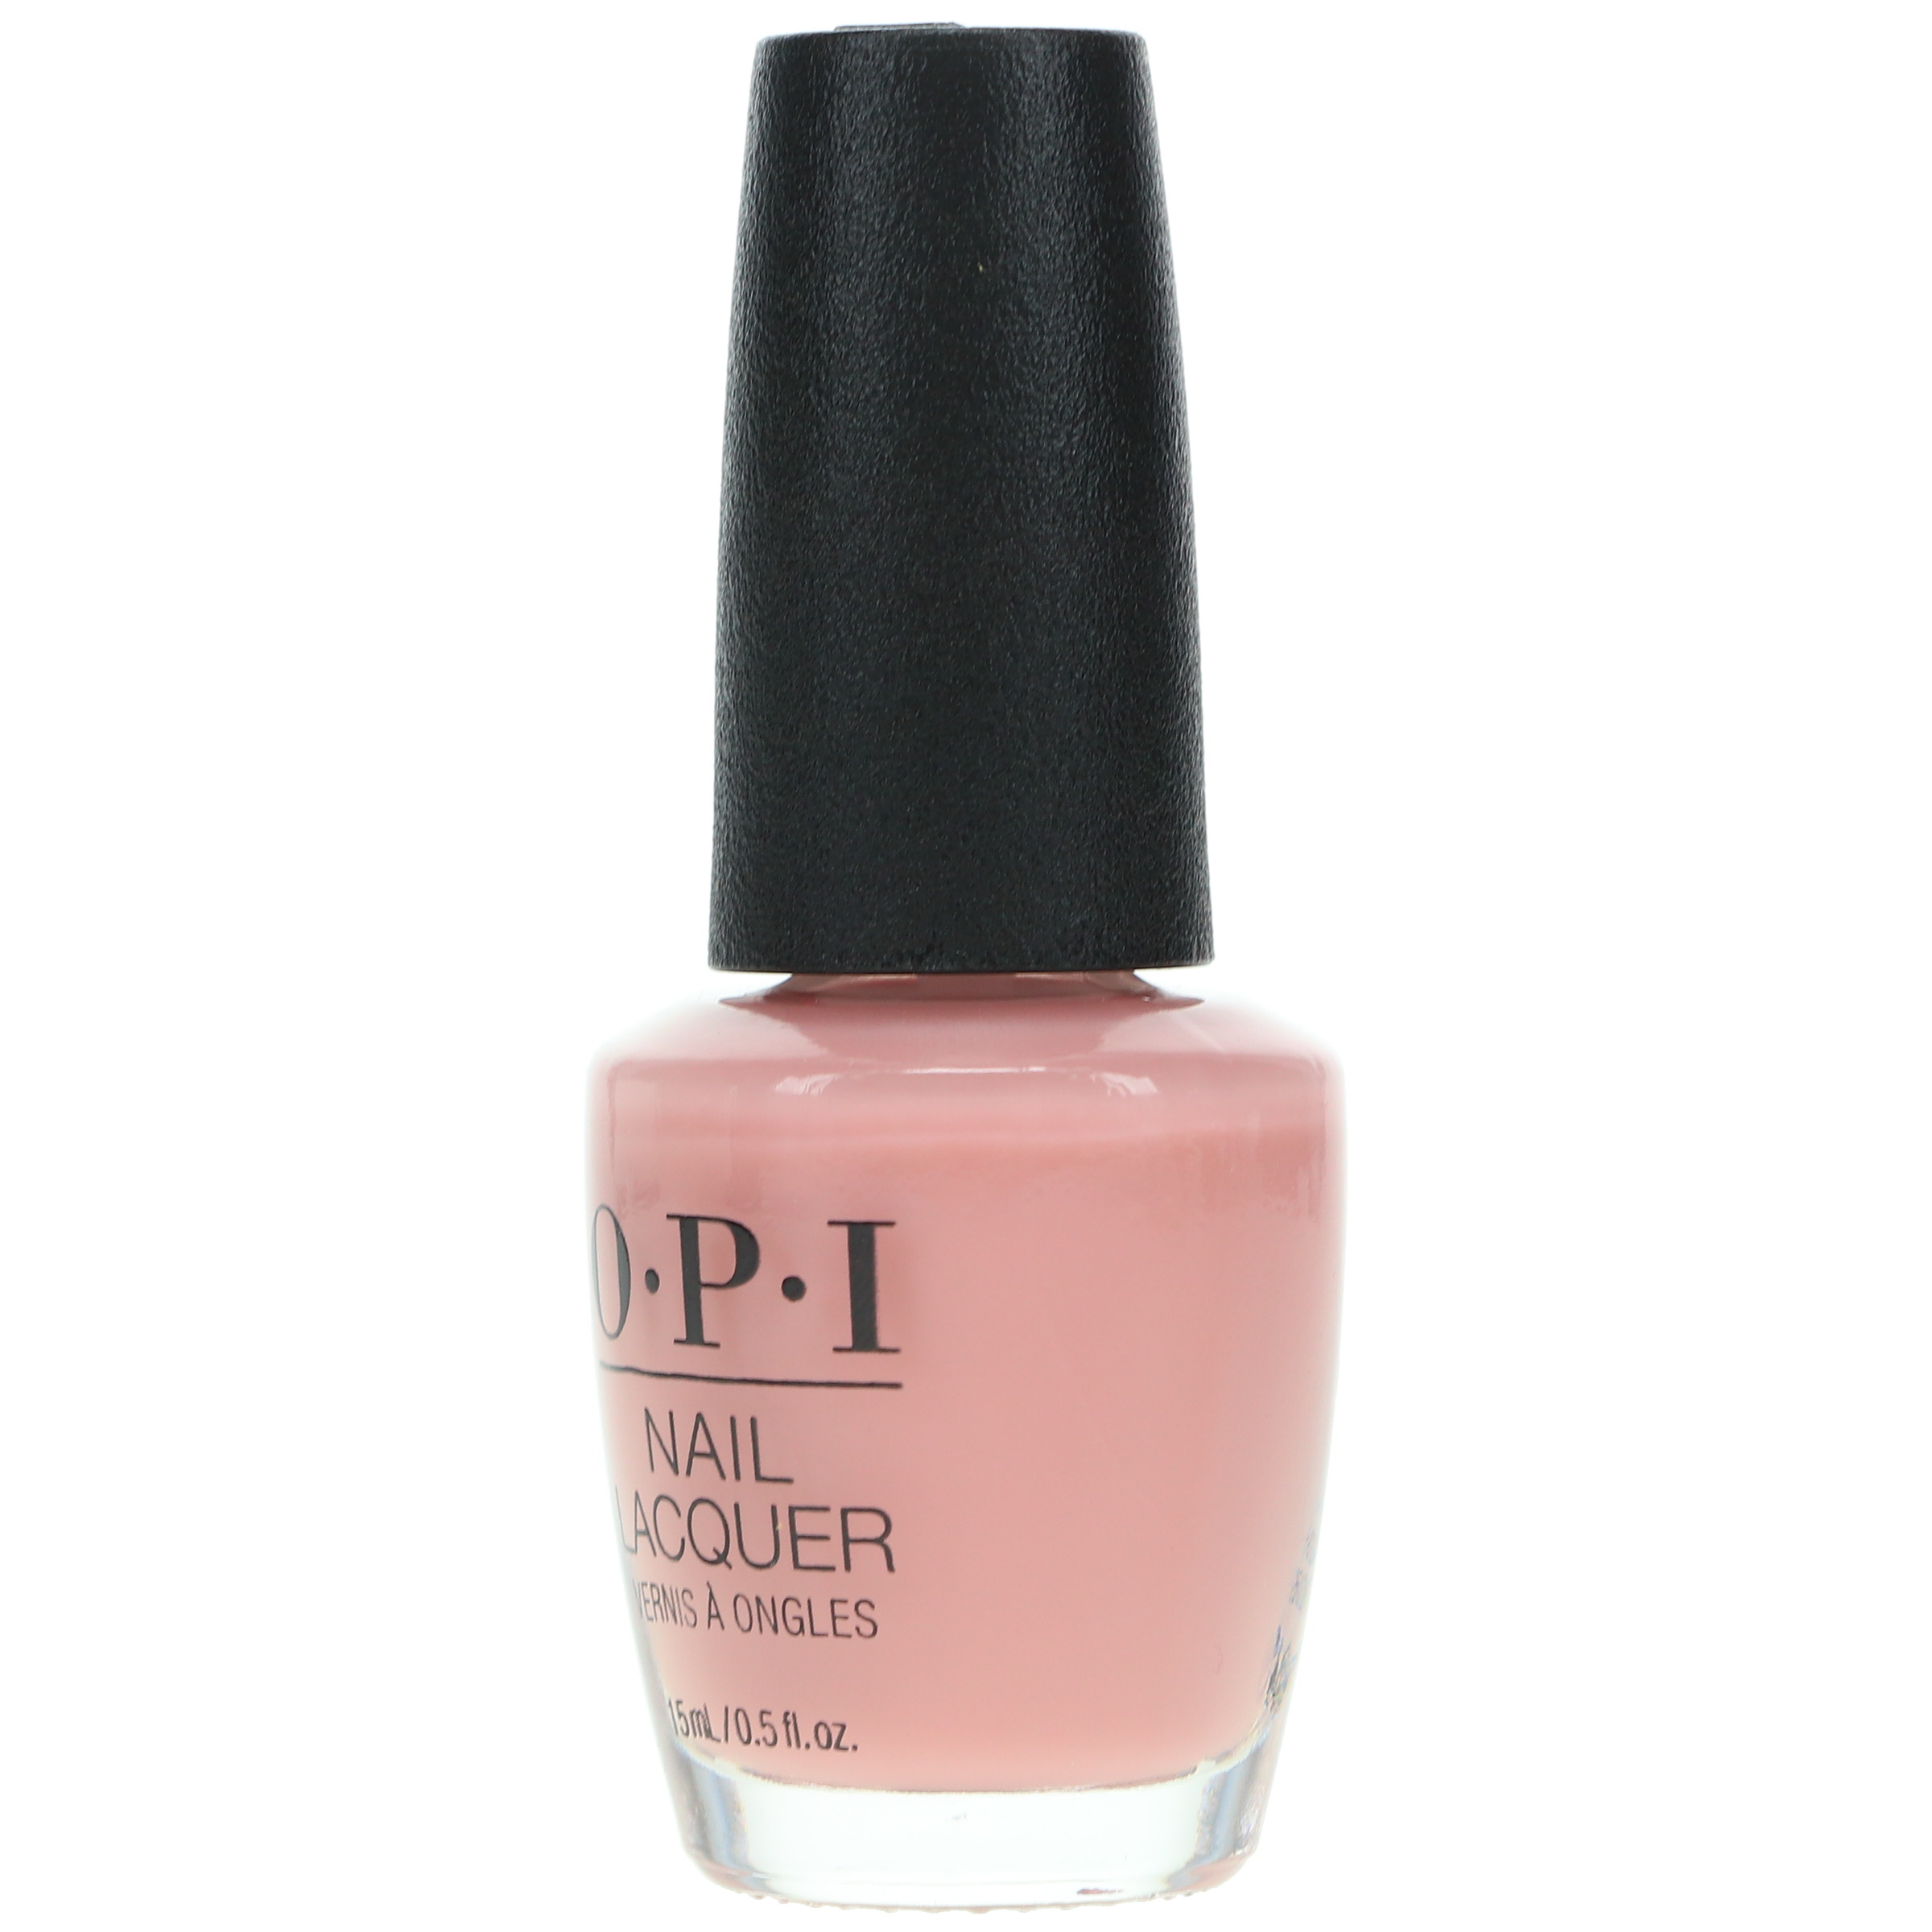 OPI Nail Lacquer - NL SH4 Bare My Soul - image 2 of 8